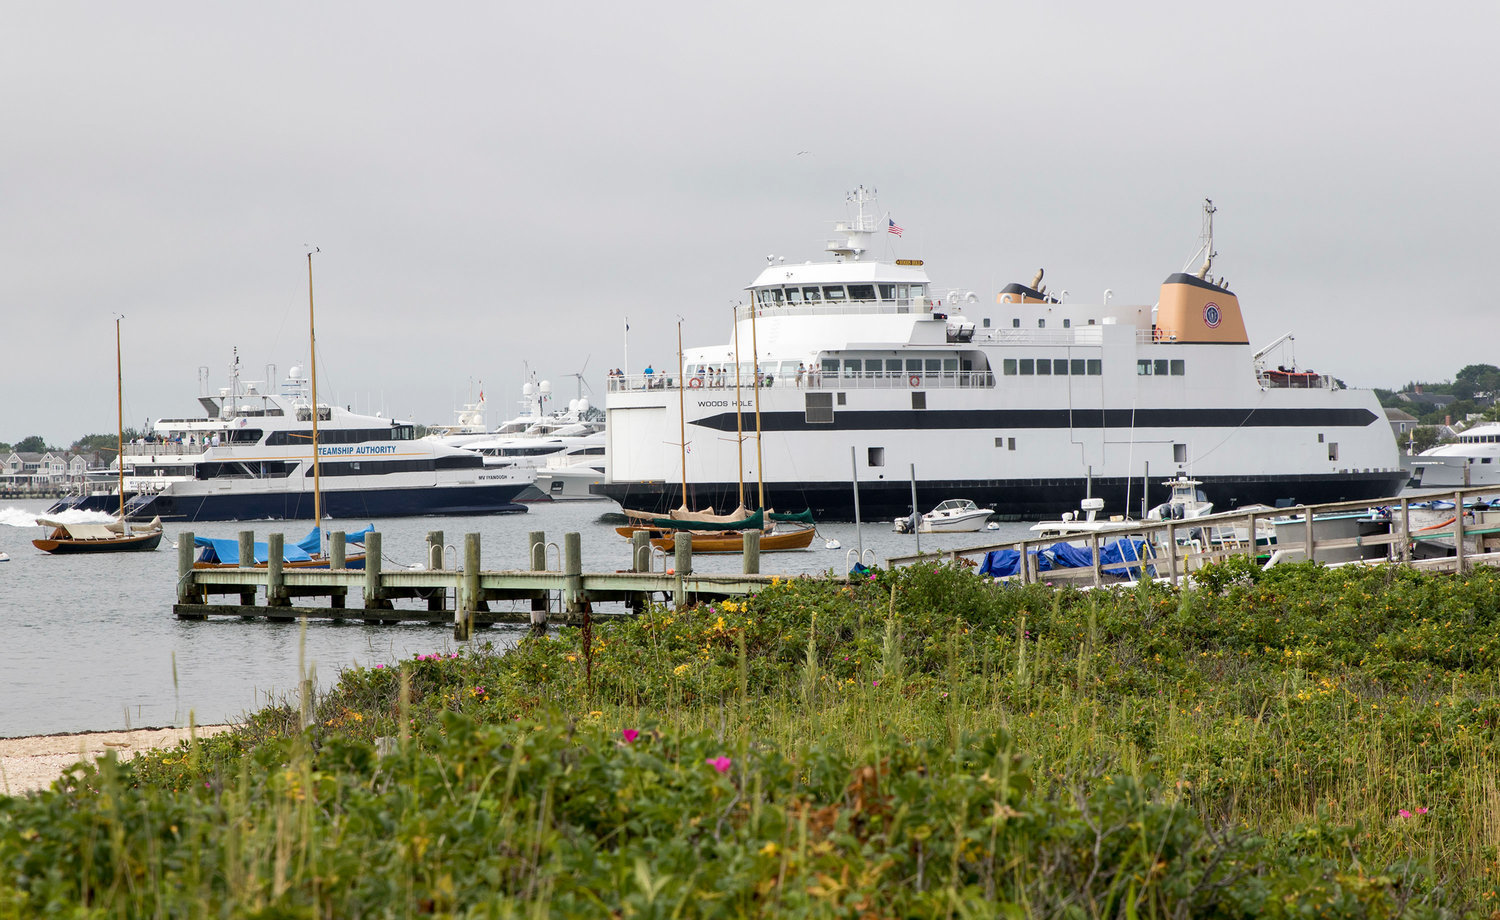 The Steamship Authority's M/V Woods Hole leaves its berth while the fast ferry Iyanough arrives in Nantucket Harbor.